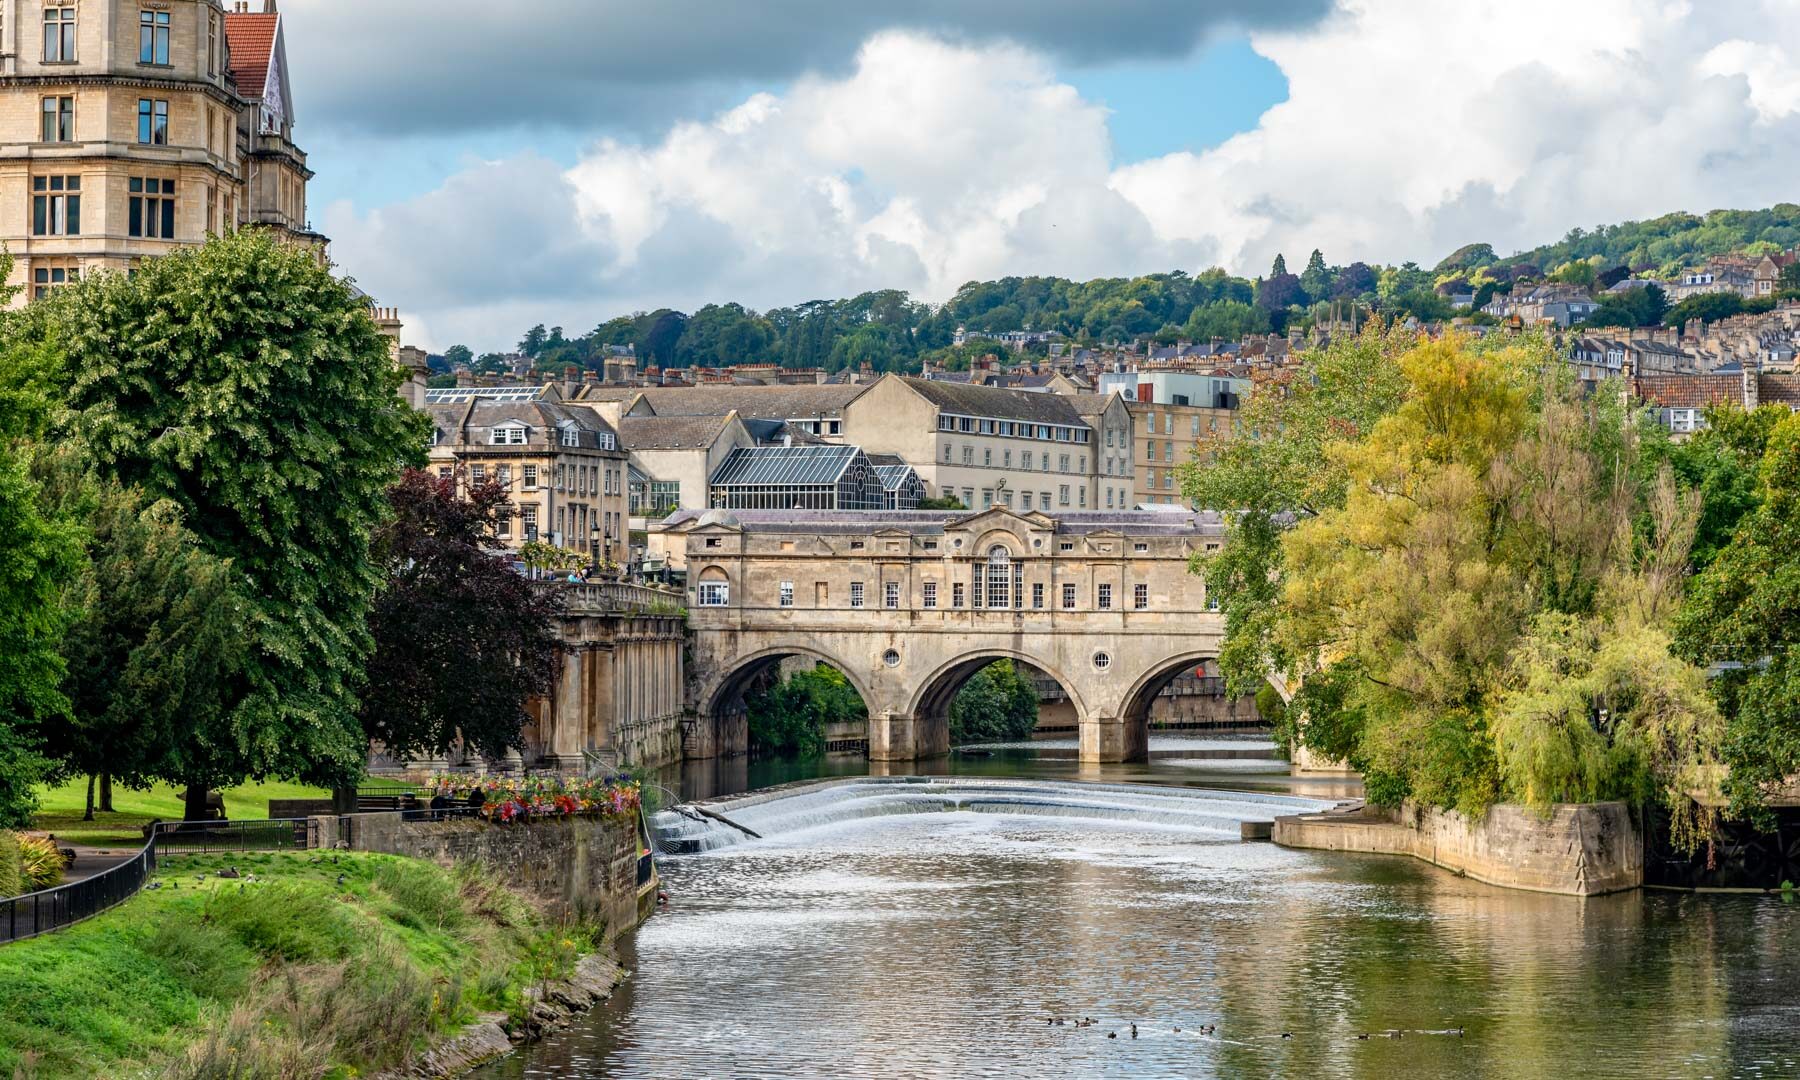 The Best Boutique Hotels in Bath, UK